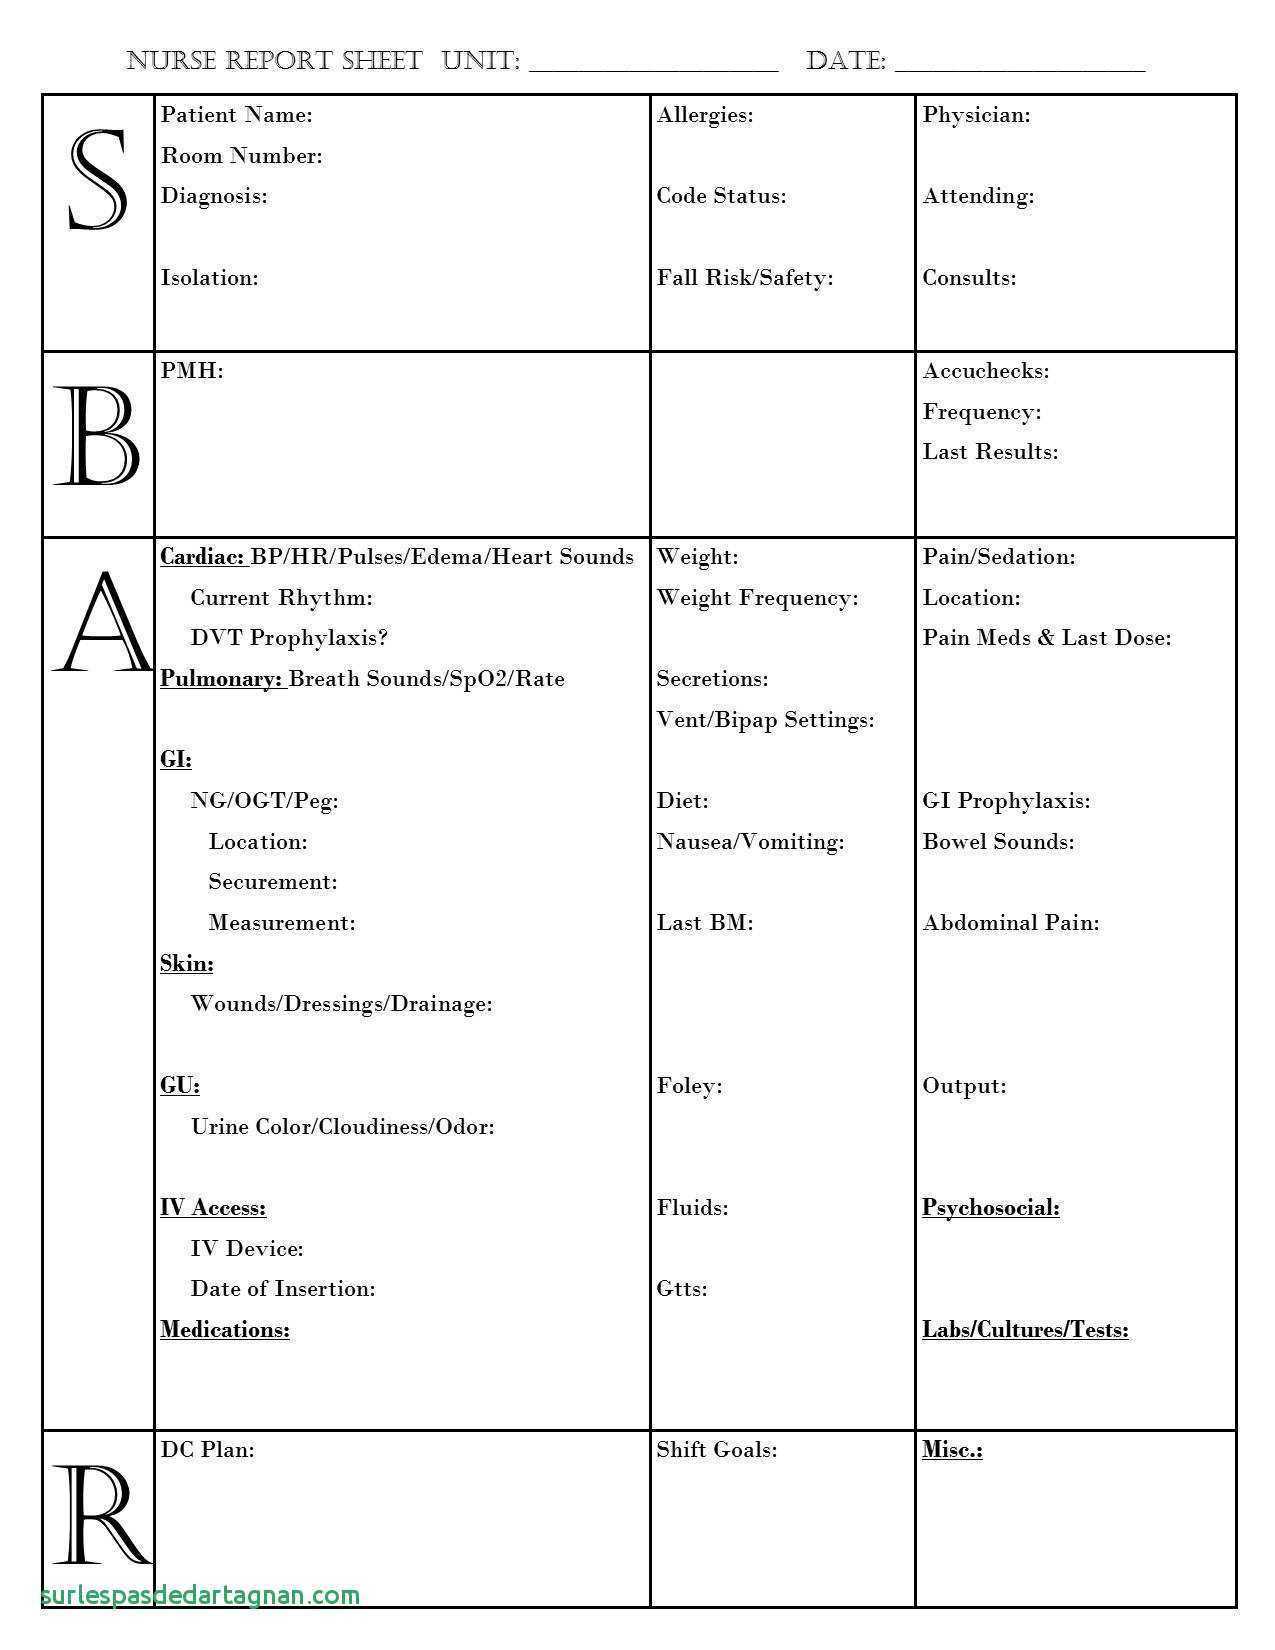 Nursing Report Sheet Template Together With Sbar Nurse Within Nurse Report Sheet Templates